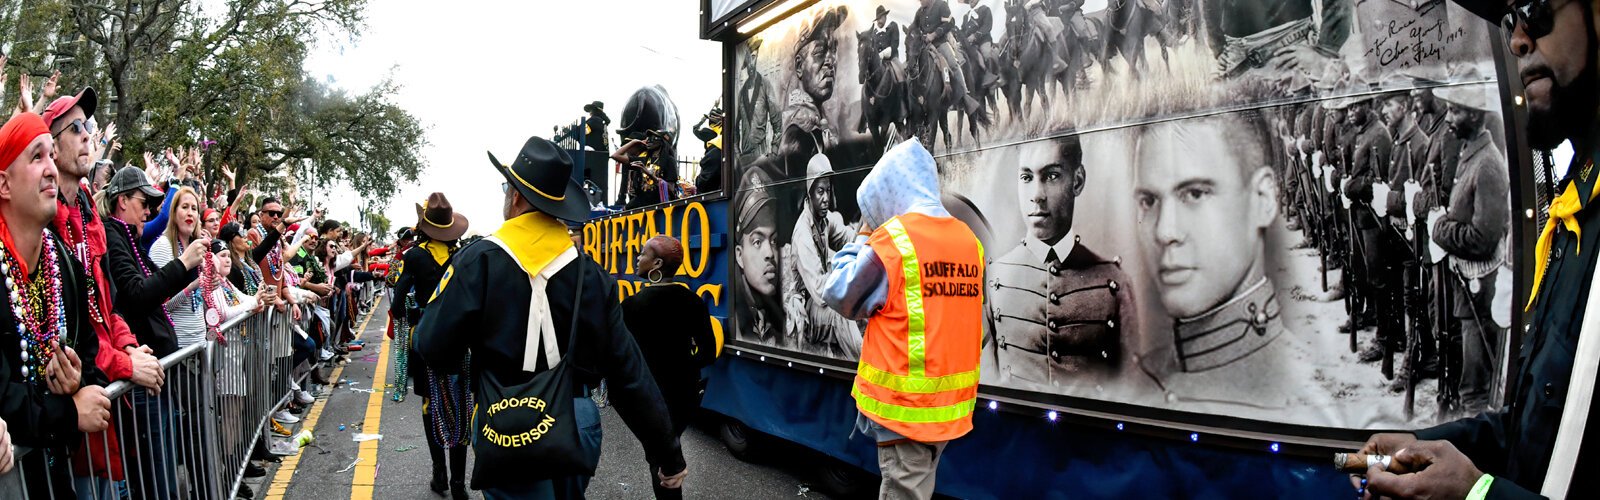 The Buffalo Soldiers float makes its way down Bayshore Boulevard. Buffalo soldiers were African American soldiers who mainly served on the Western frontier following the Civil War.